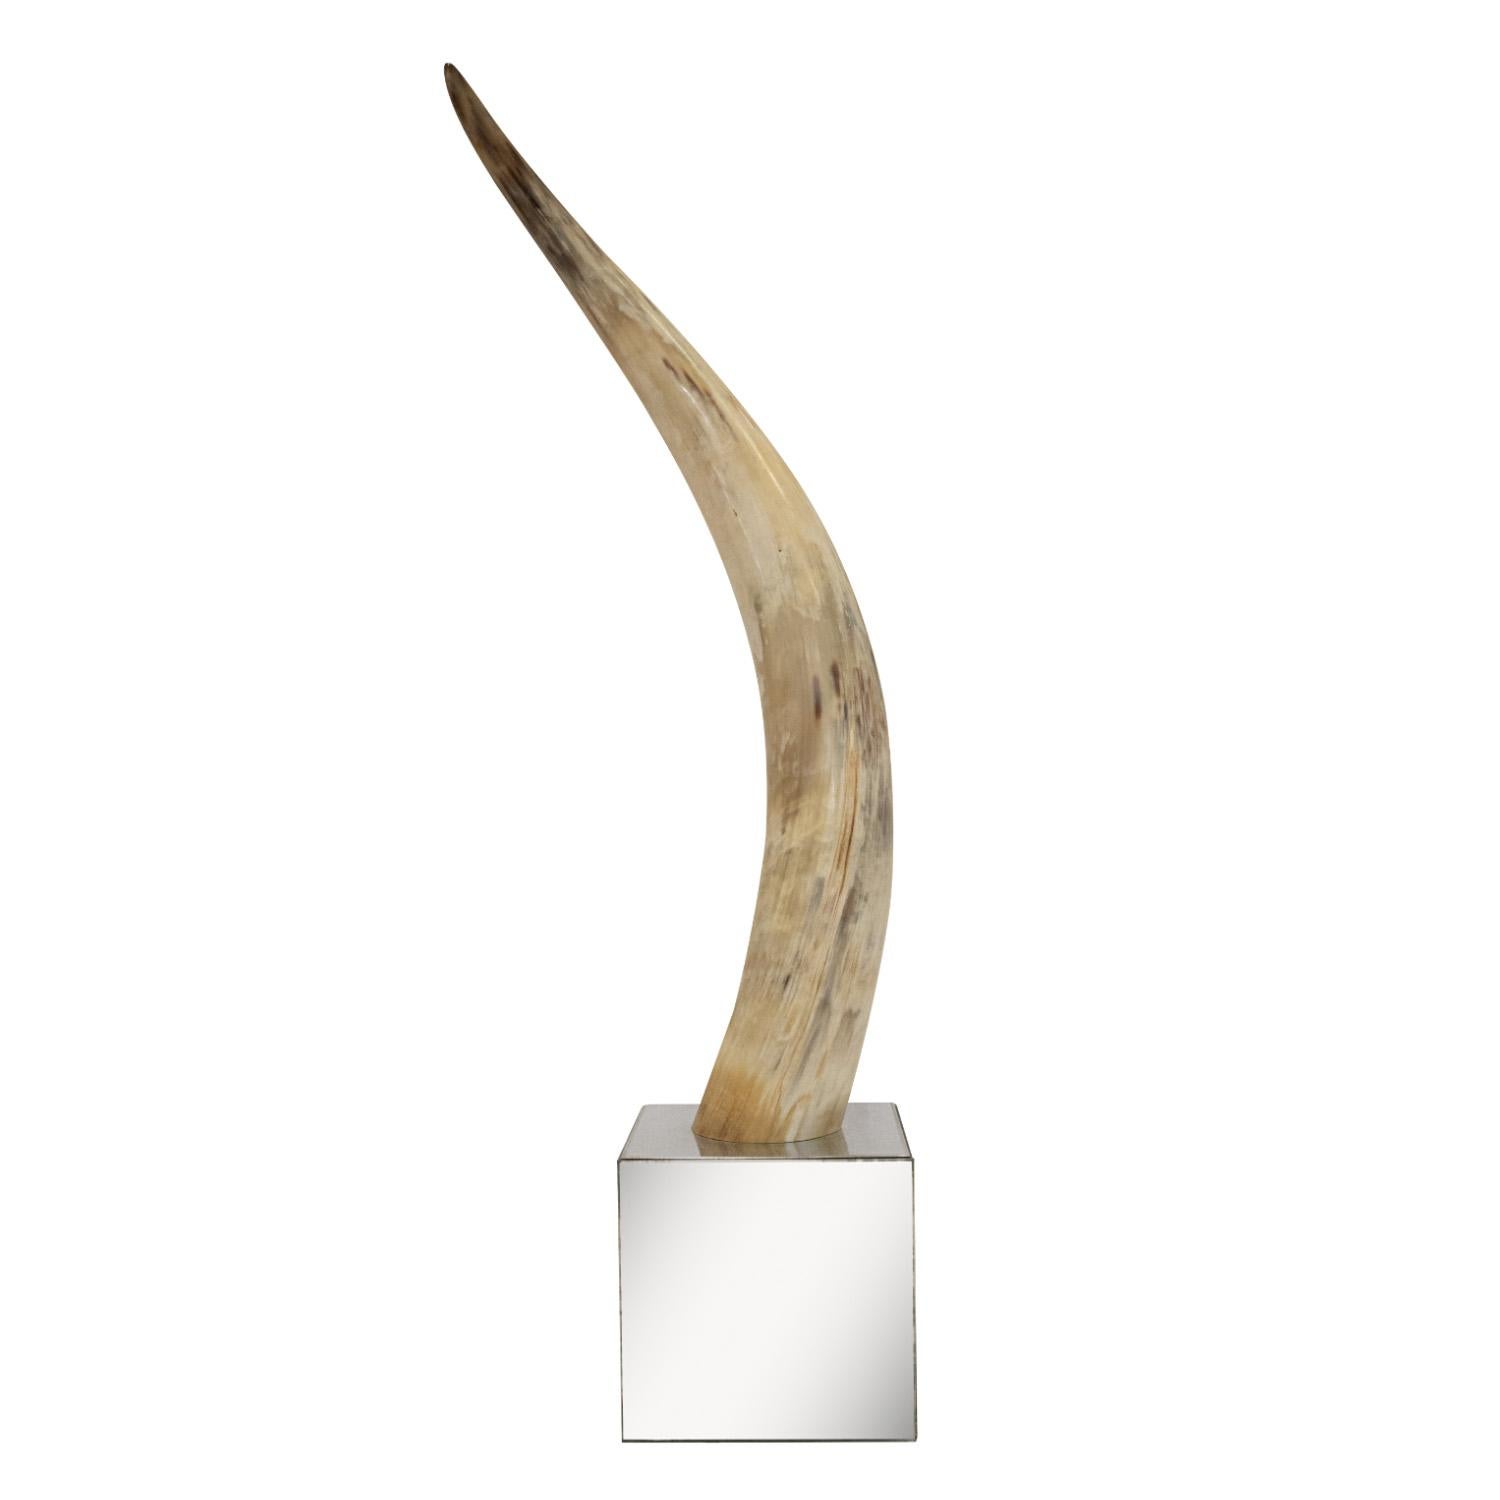 Large horn mounted on a mirrored cube base, American 1970's.  Iconic 70’s design.  